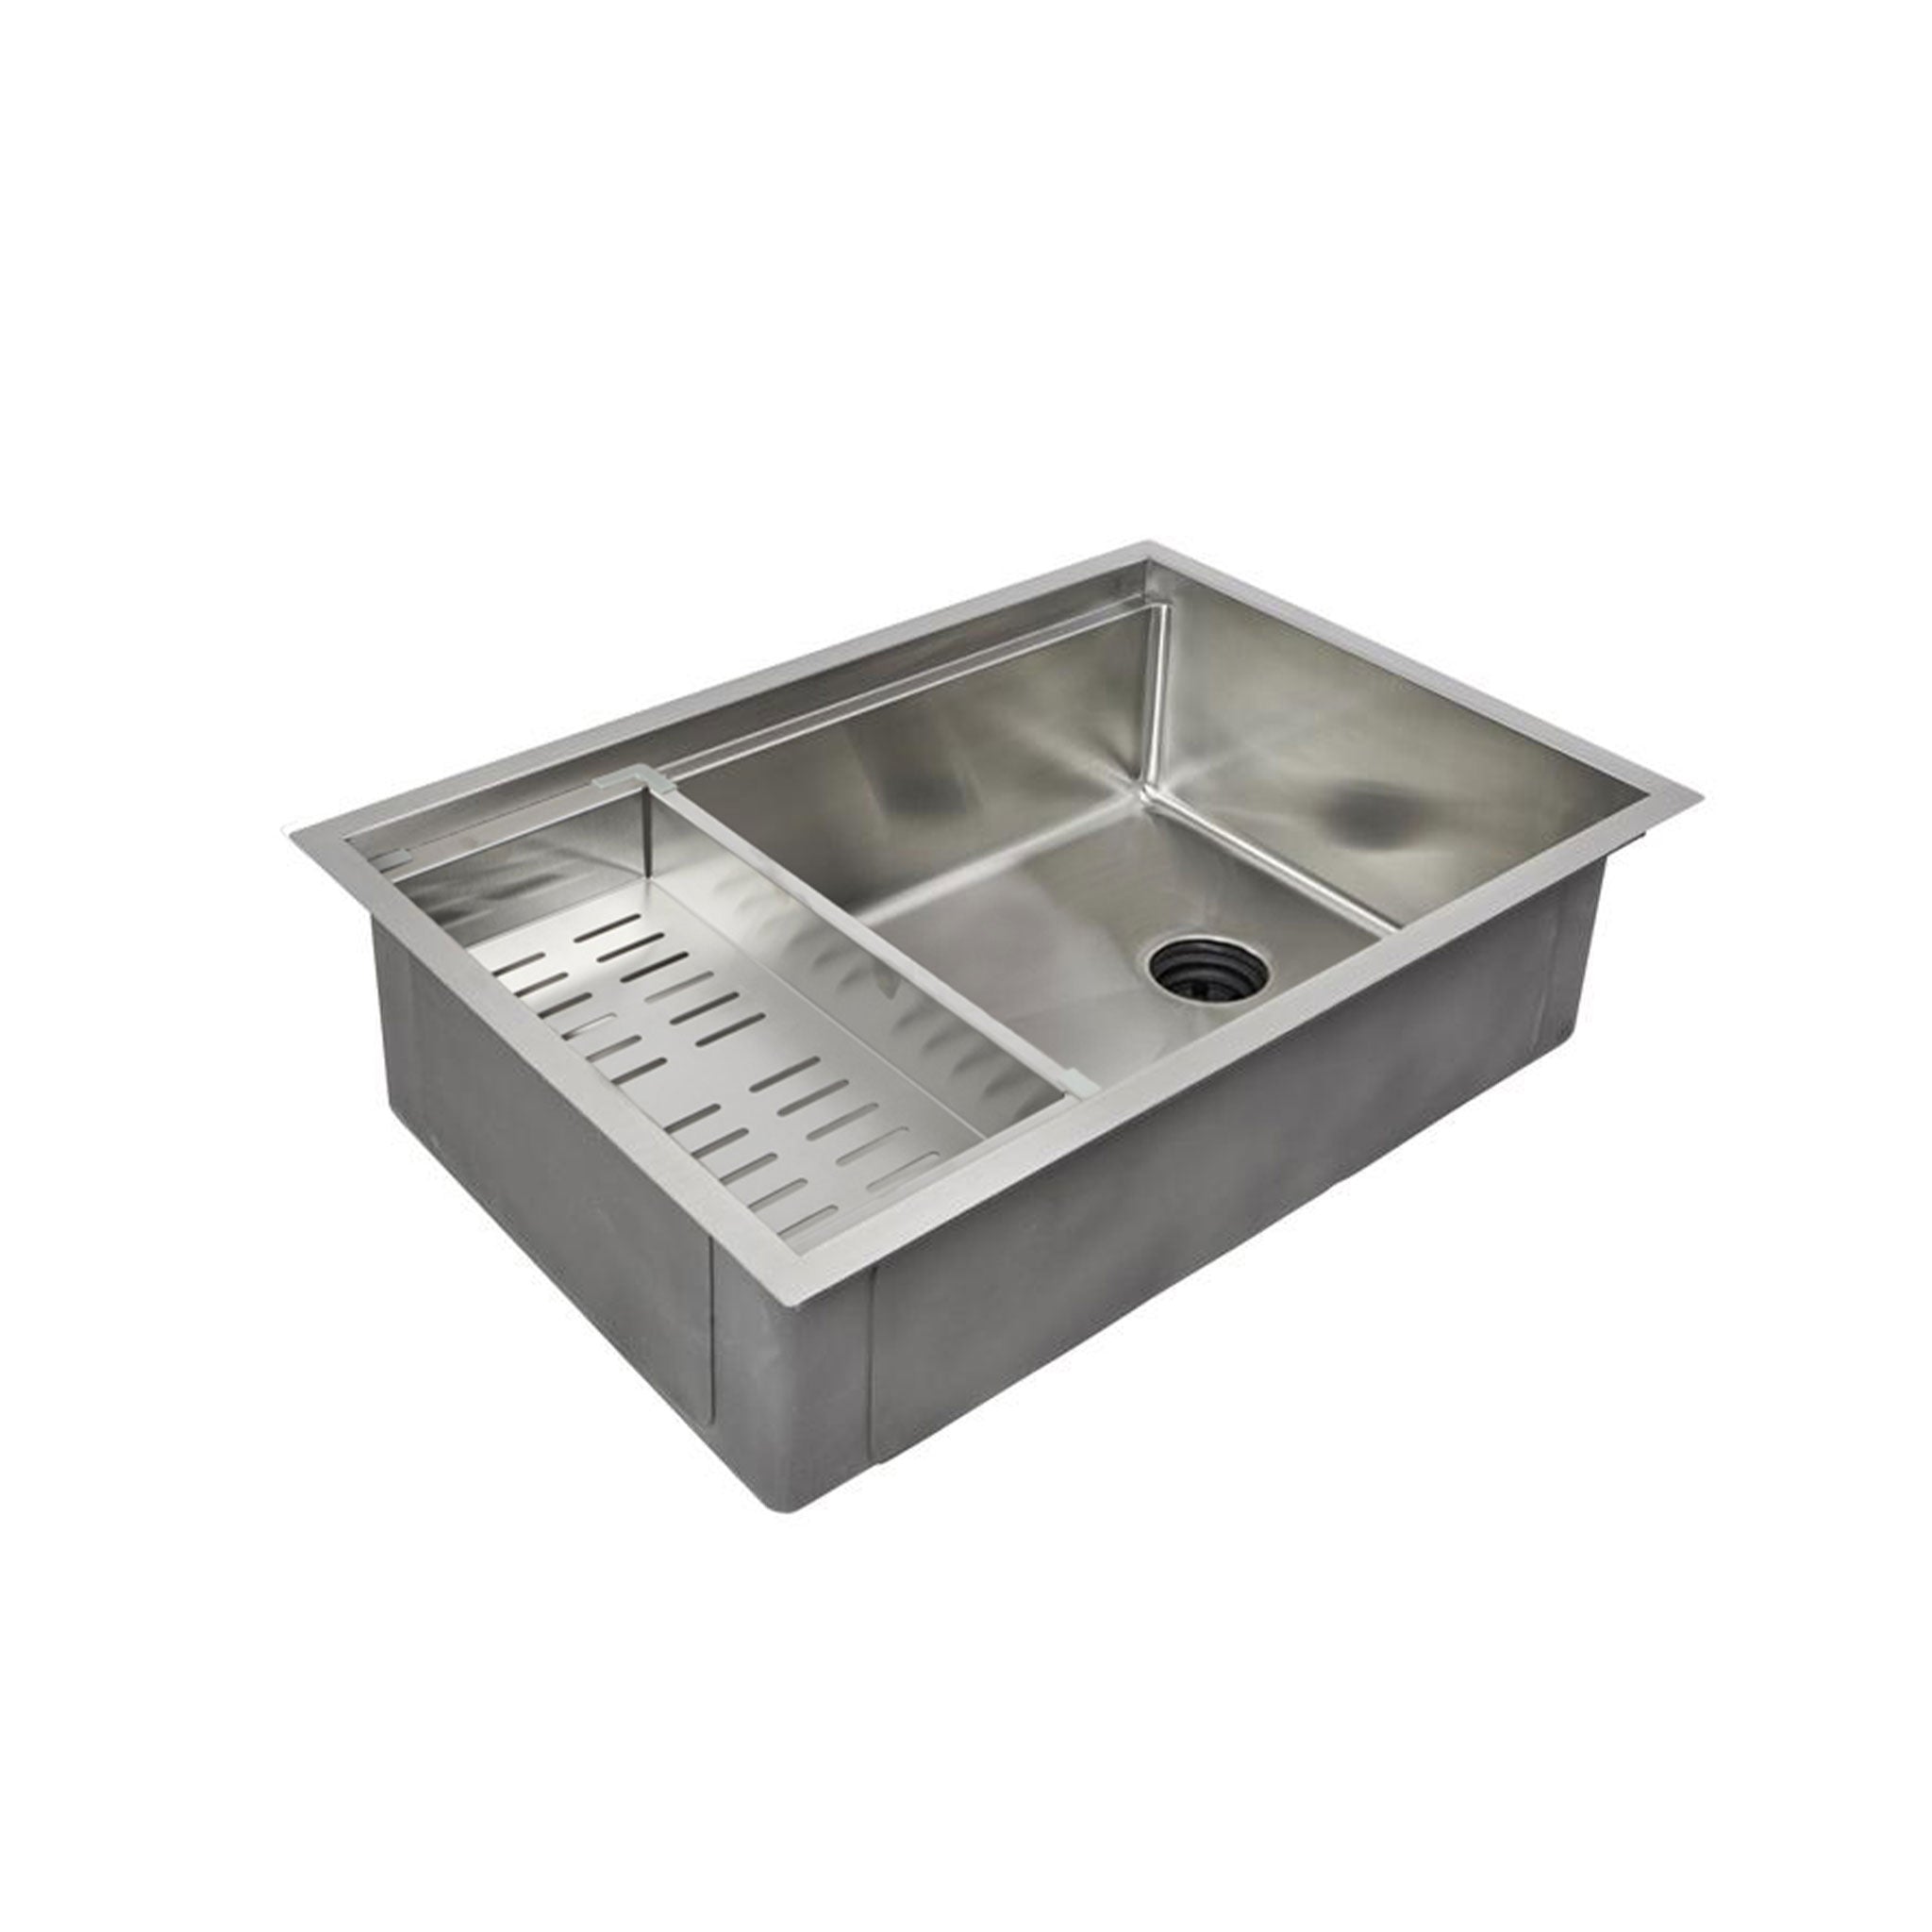 33" reversible workstation undermount stainless steel sink with reversible, offset drain, 1/2" Radius and single Bowl Sinks.